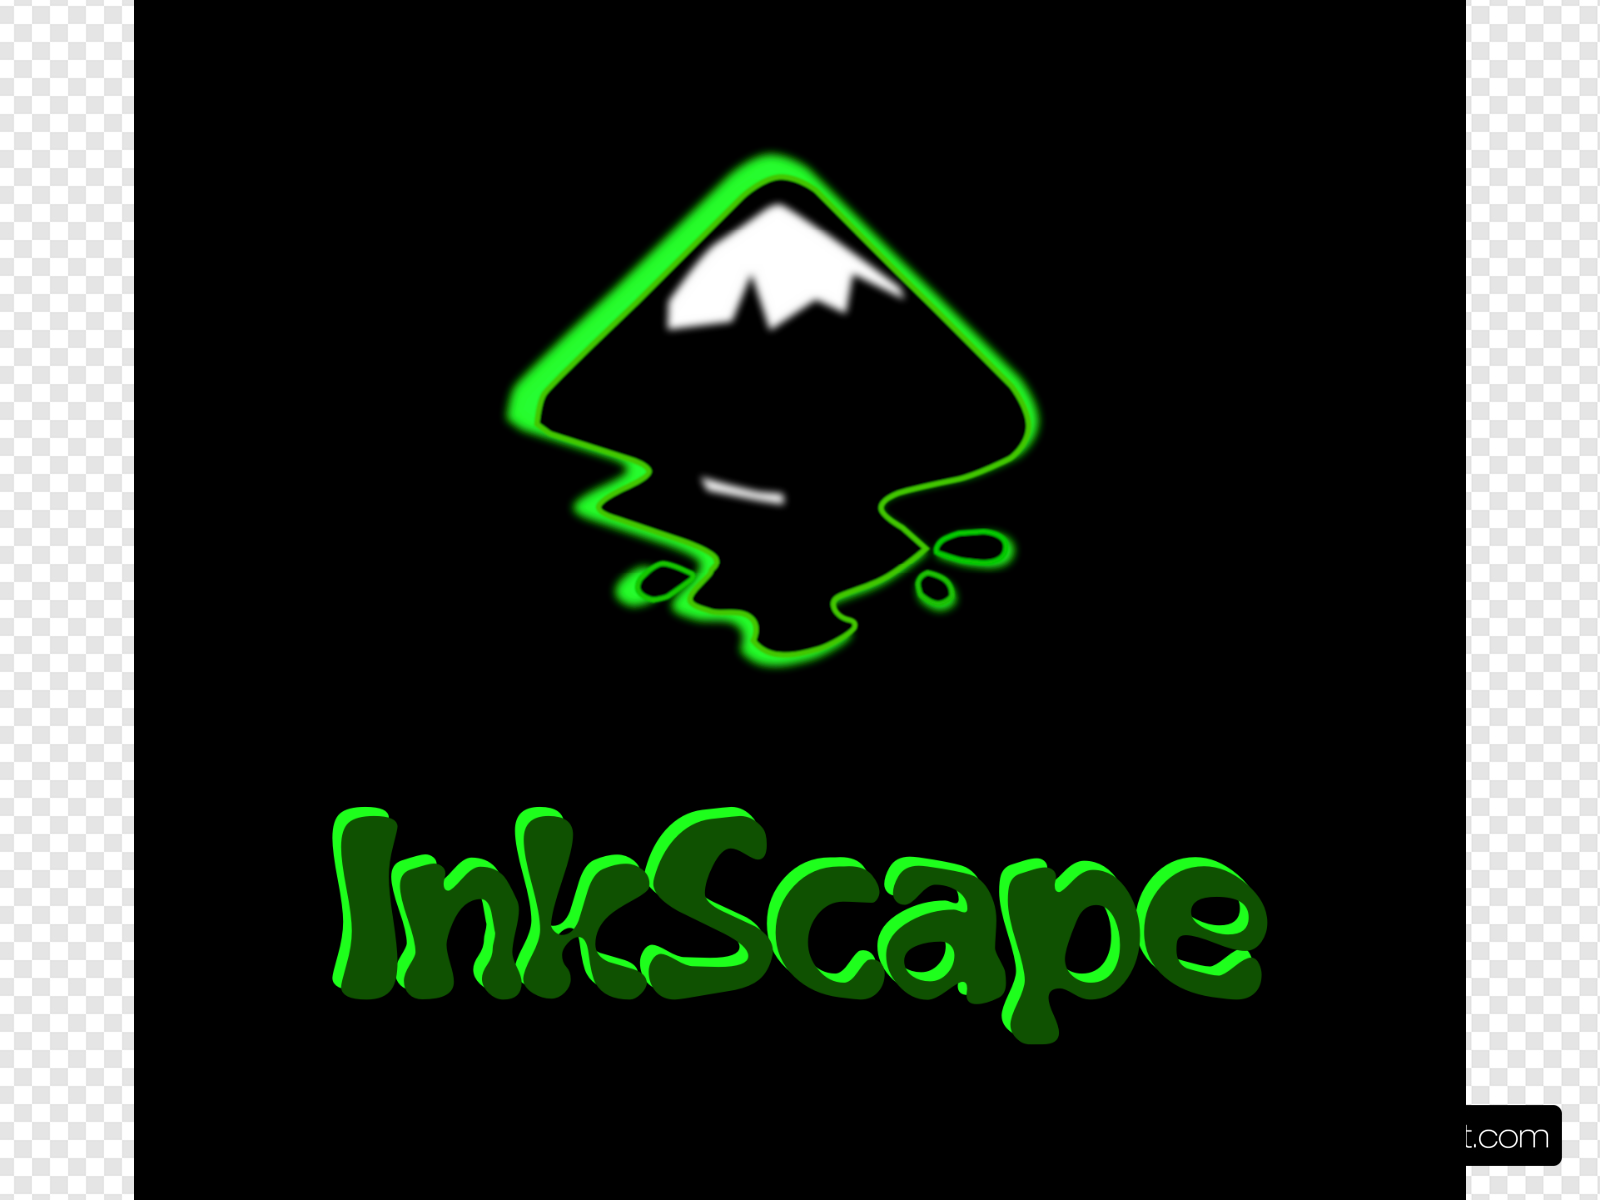 Inkscape black and.